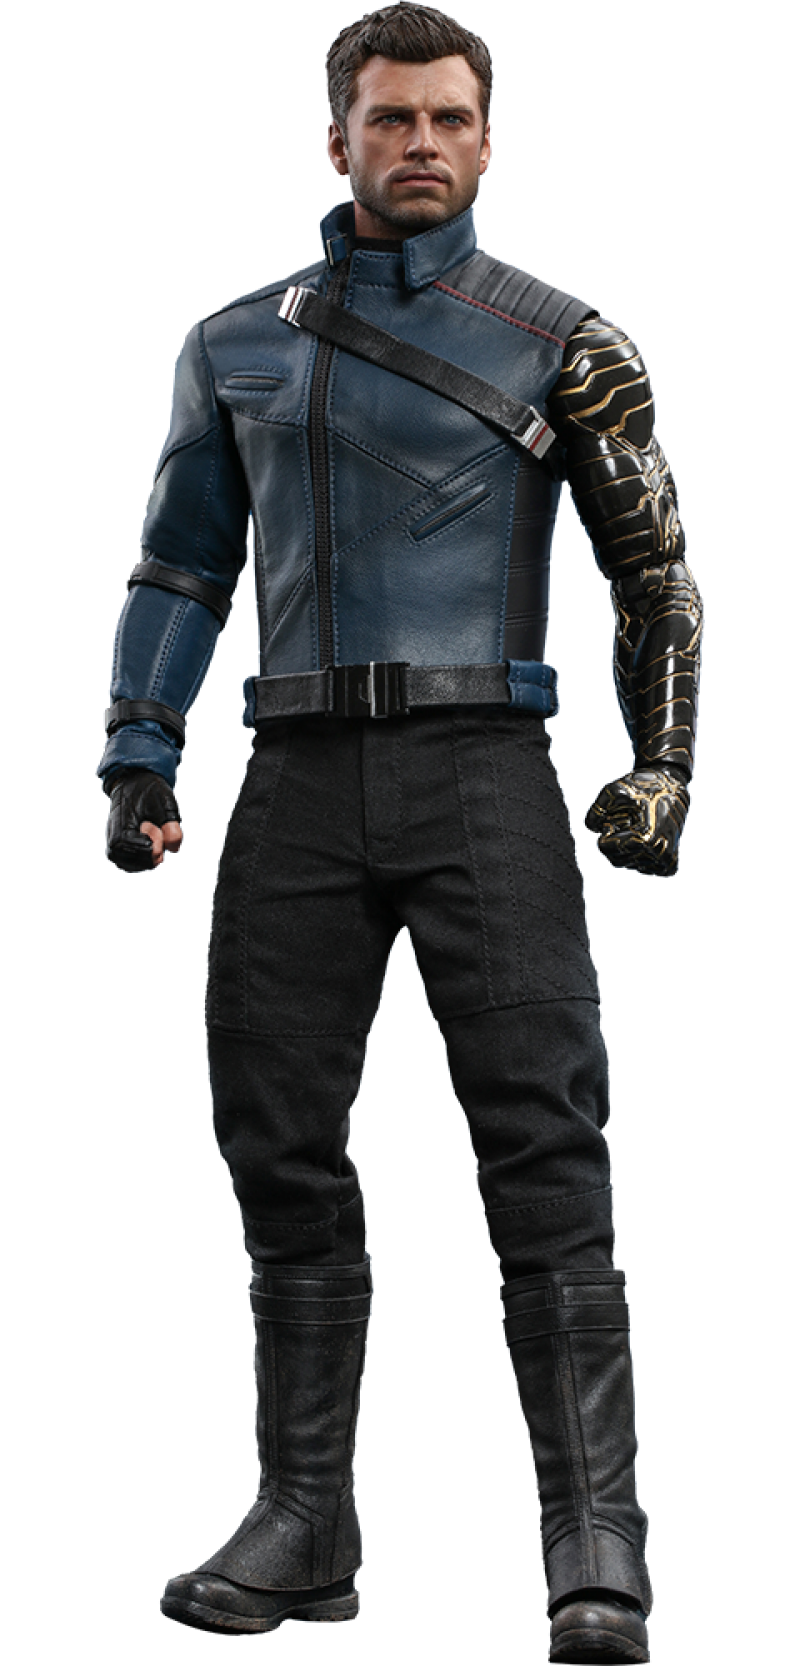 Hot Toys Winter Soldier Sixth Scale Figure - State of Comics